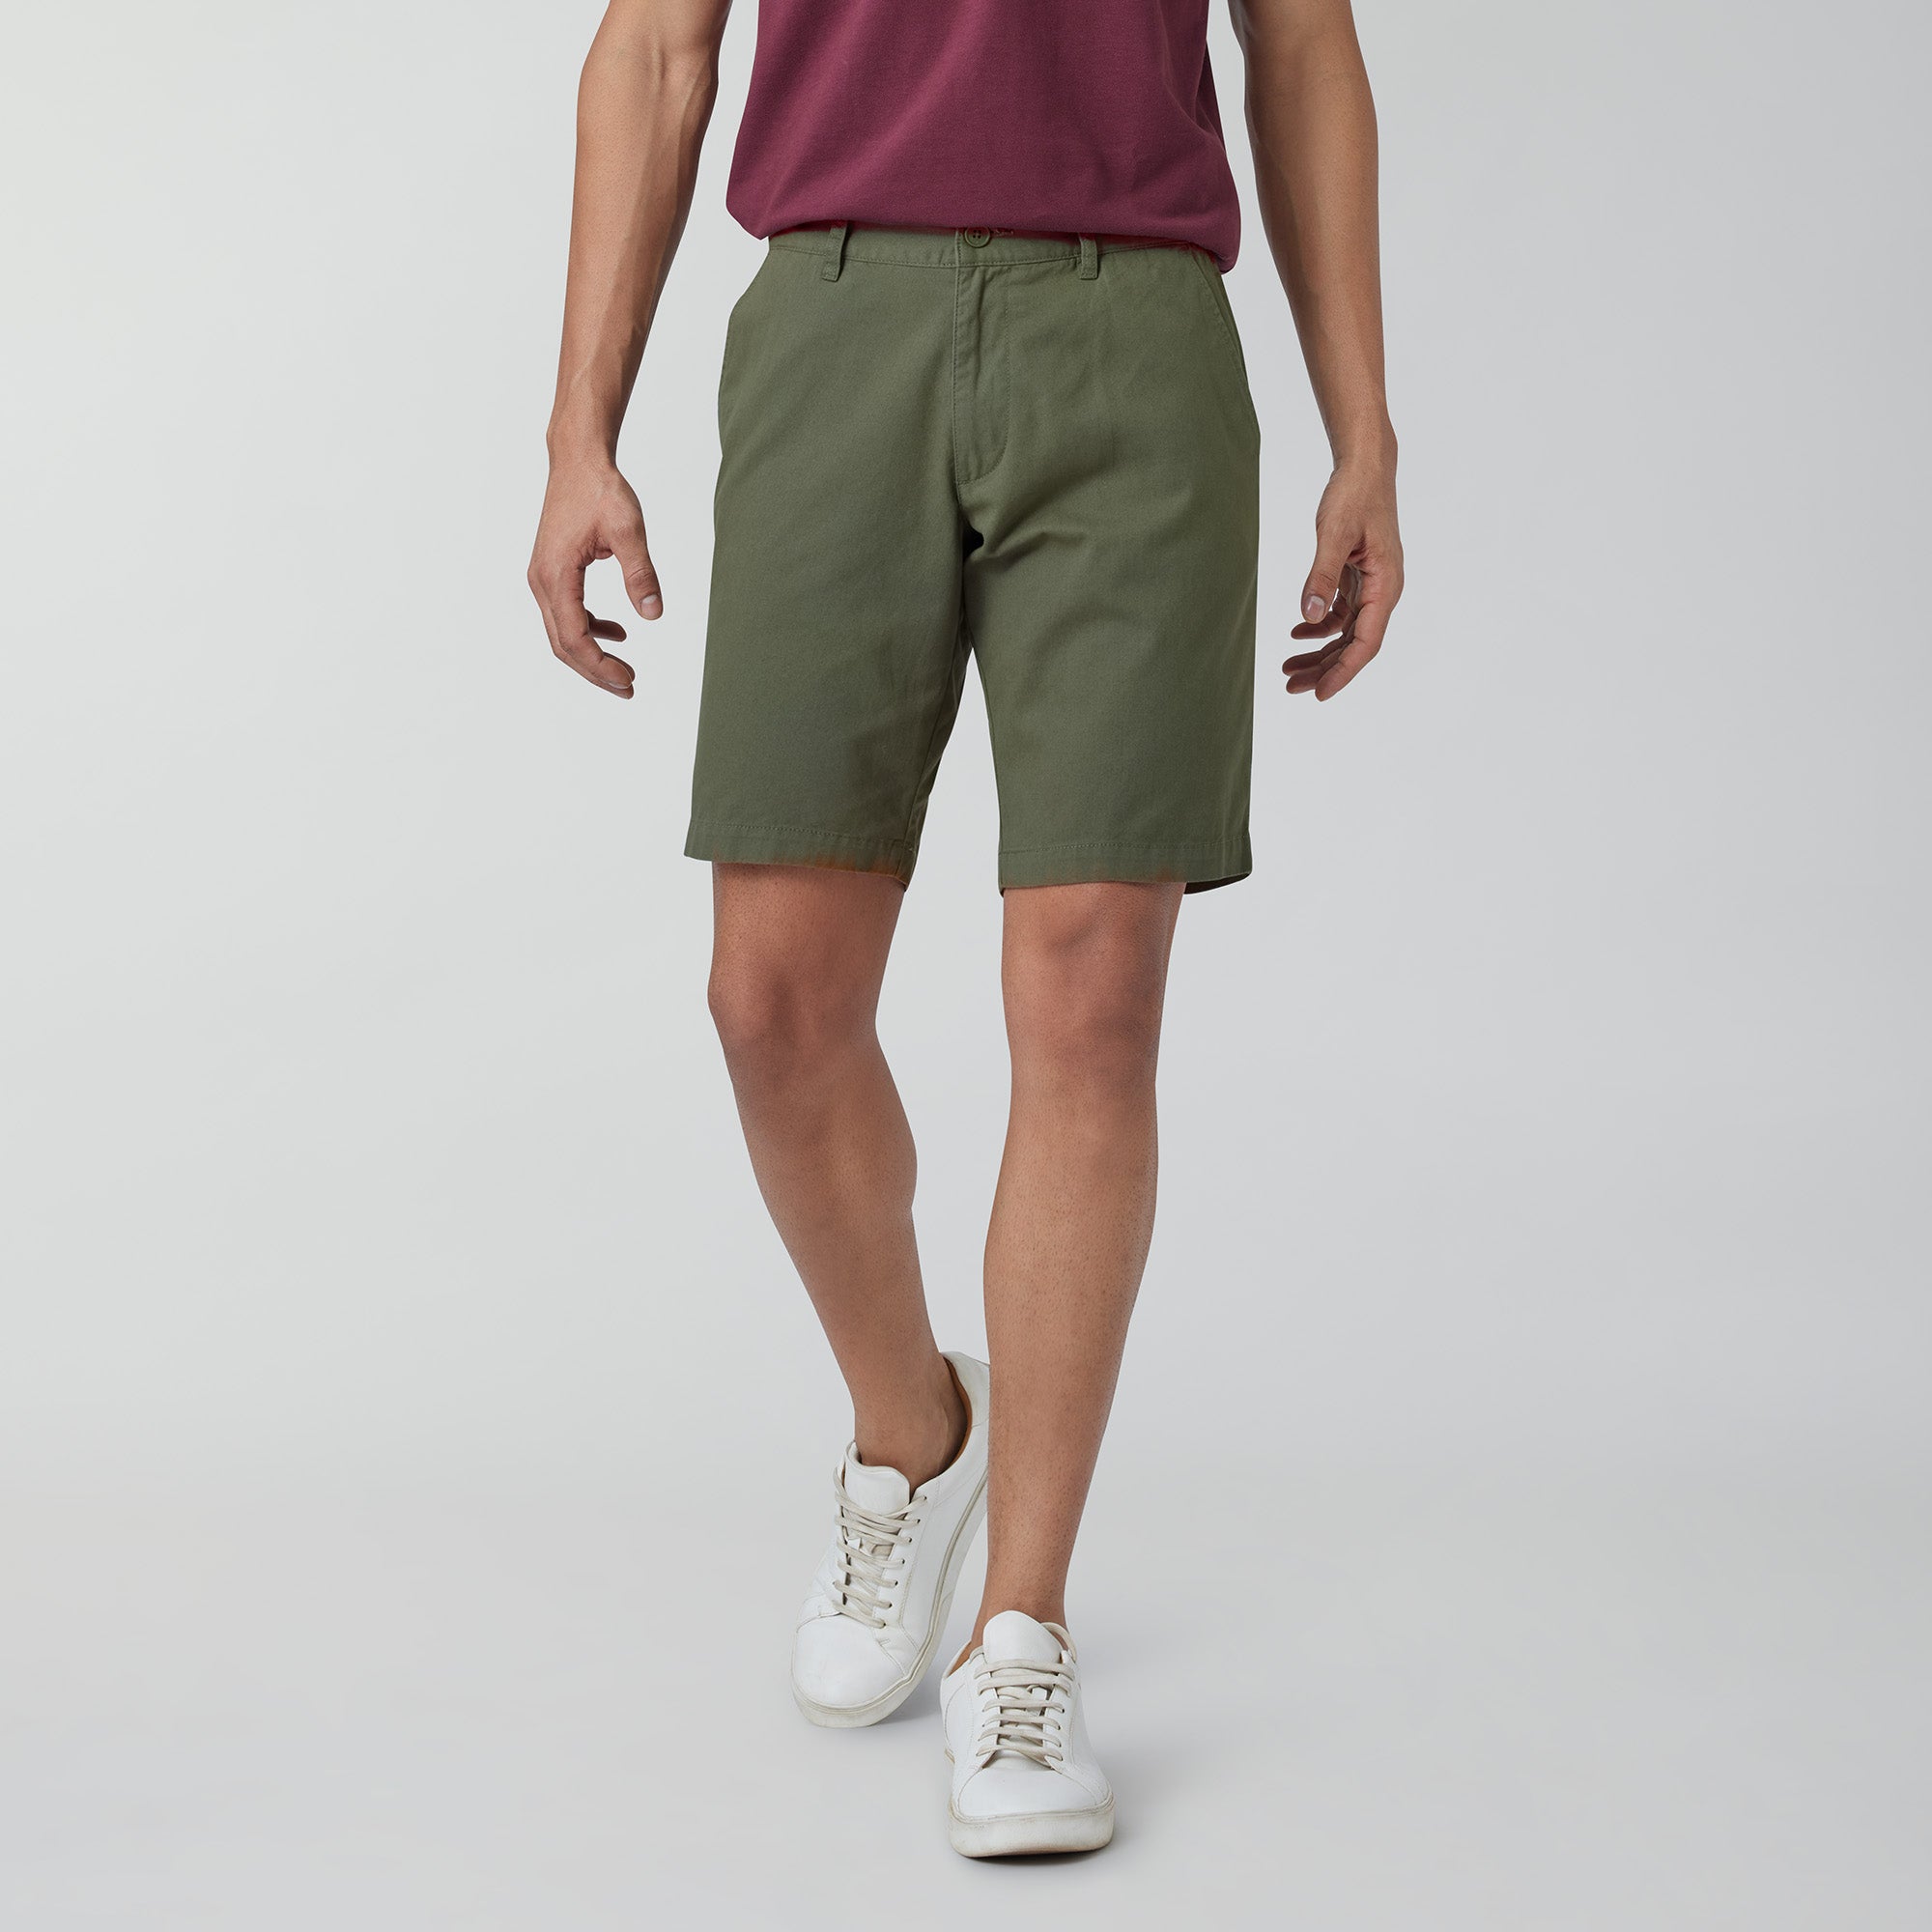 Element Cotton Chinos Shorts For Men Olive Green - XYXX Crew